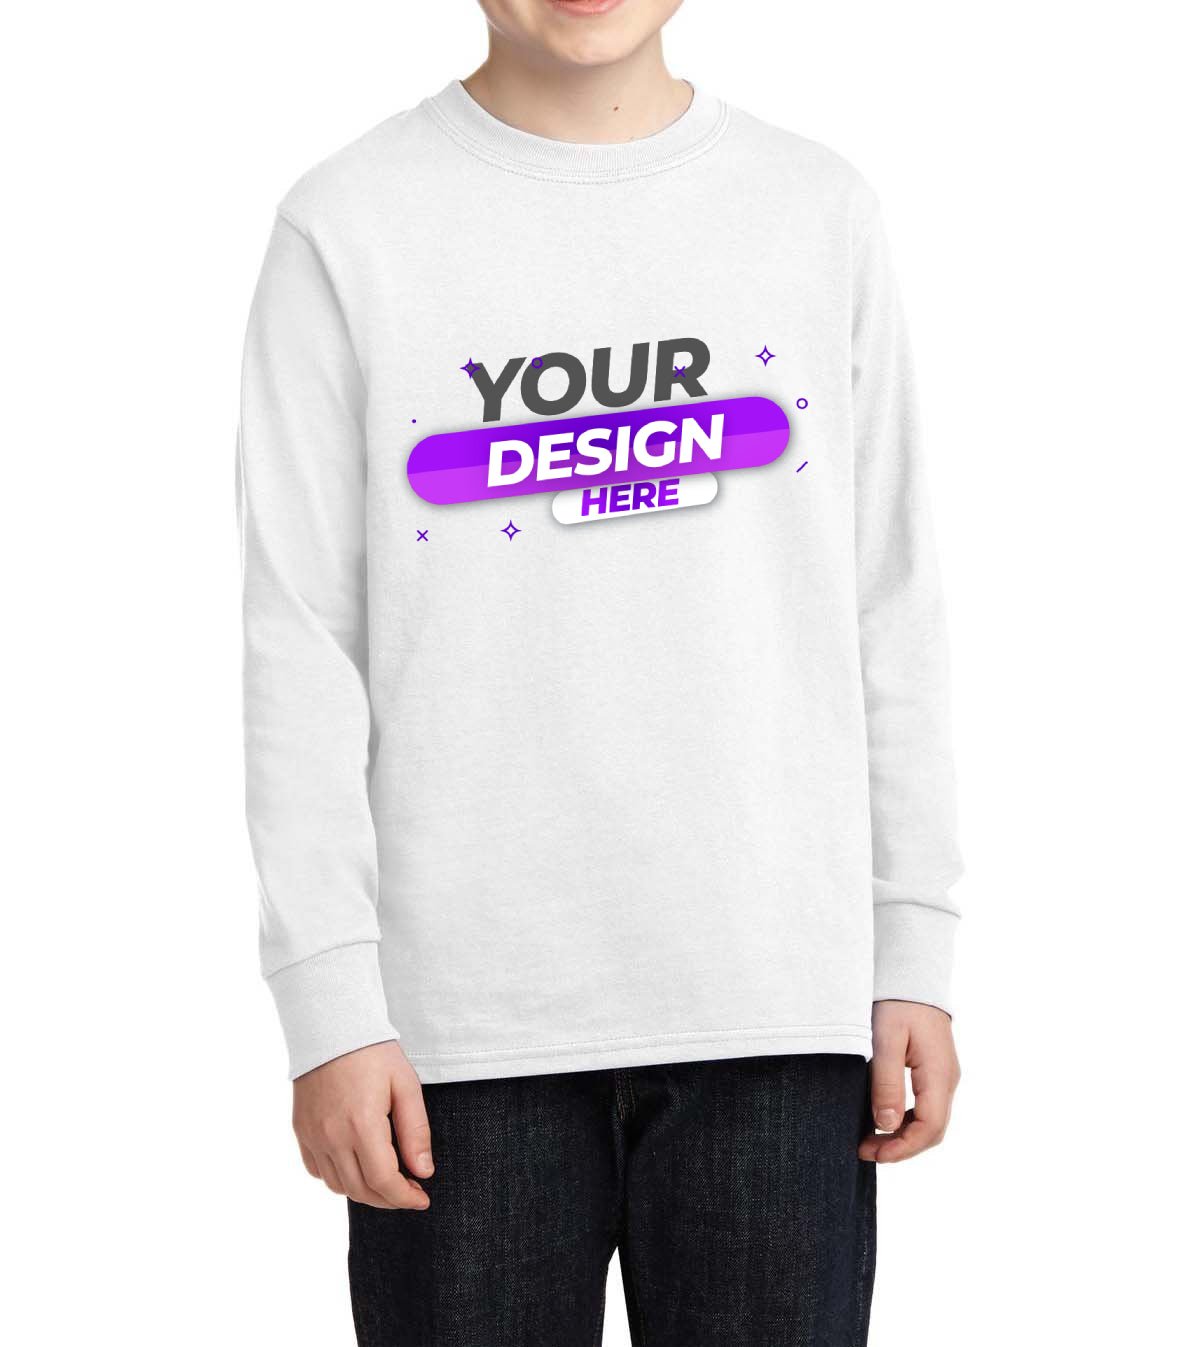 Youth Long Sleeve Core Cotton tee